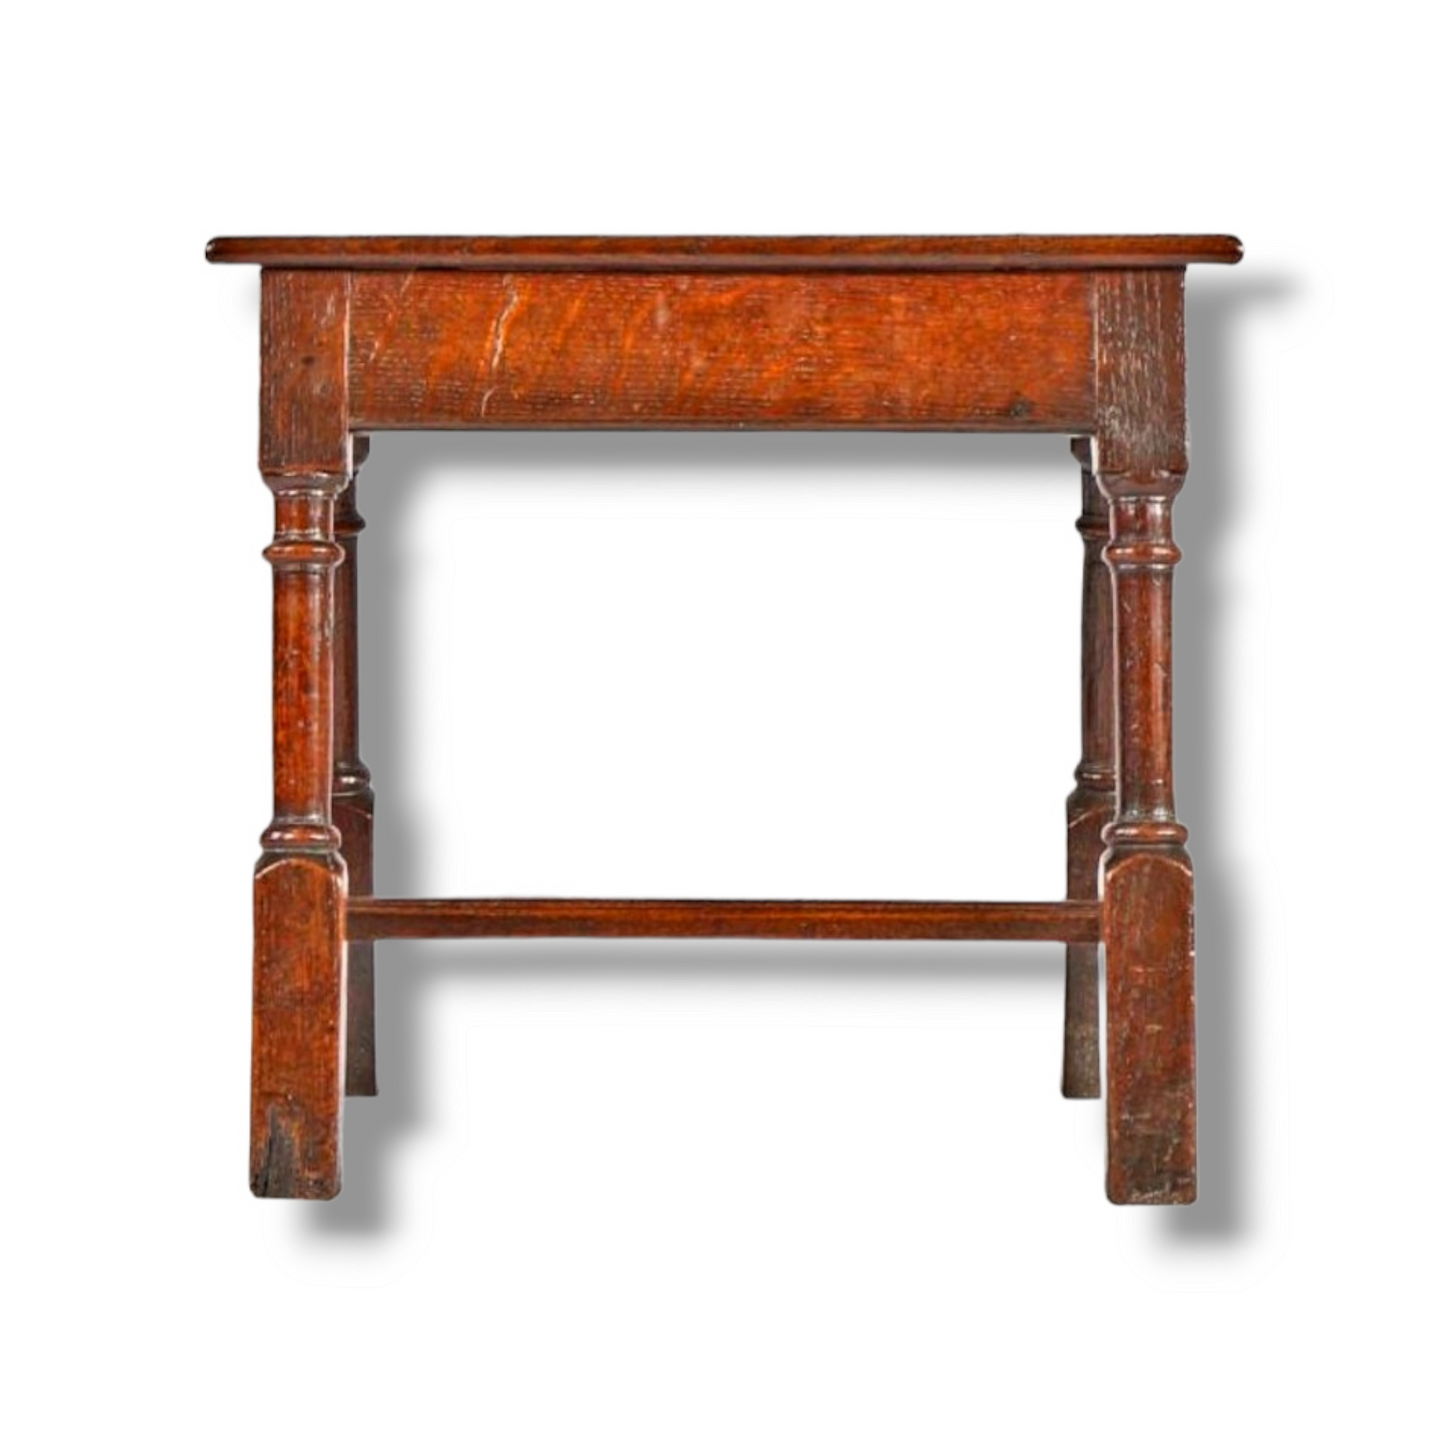 Late 17th Century English Antique Oak Joint Stool With "H Stretcher", Circa 1690